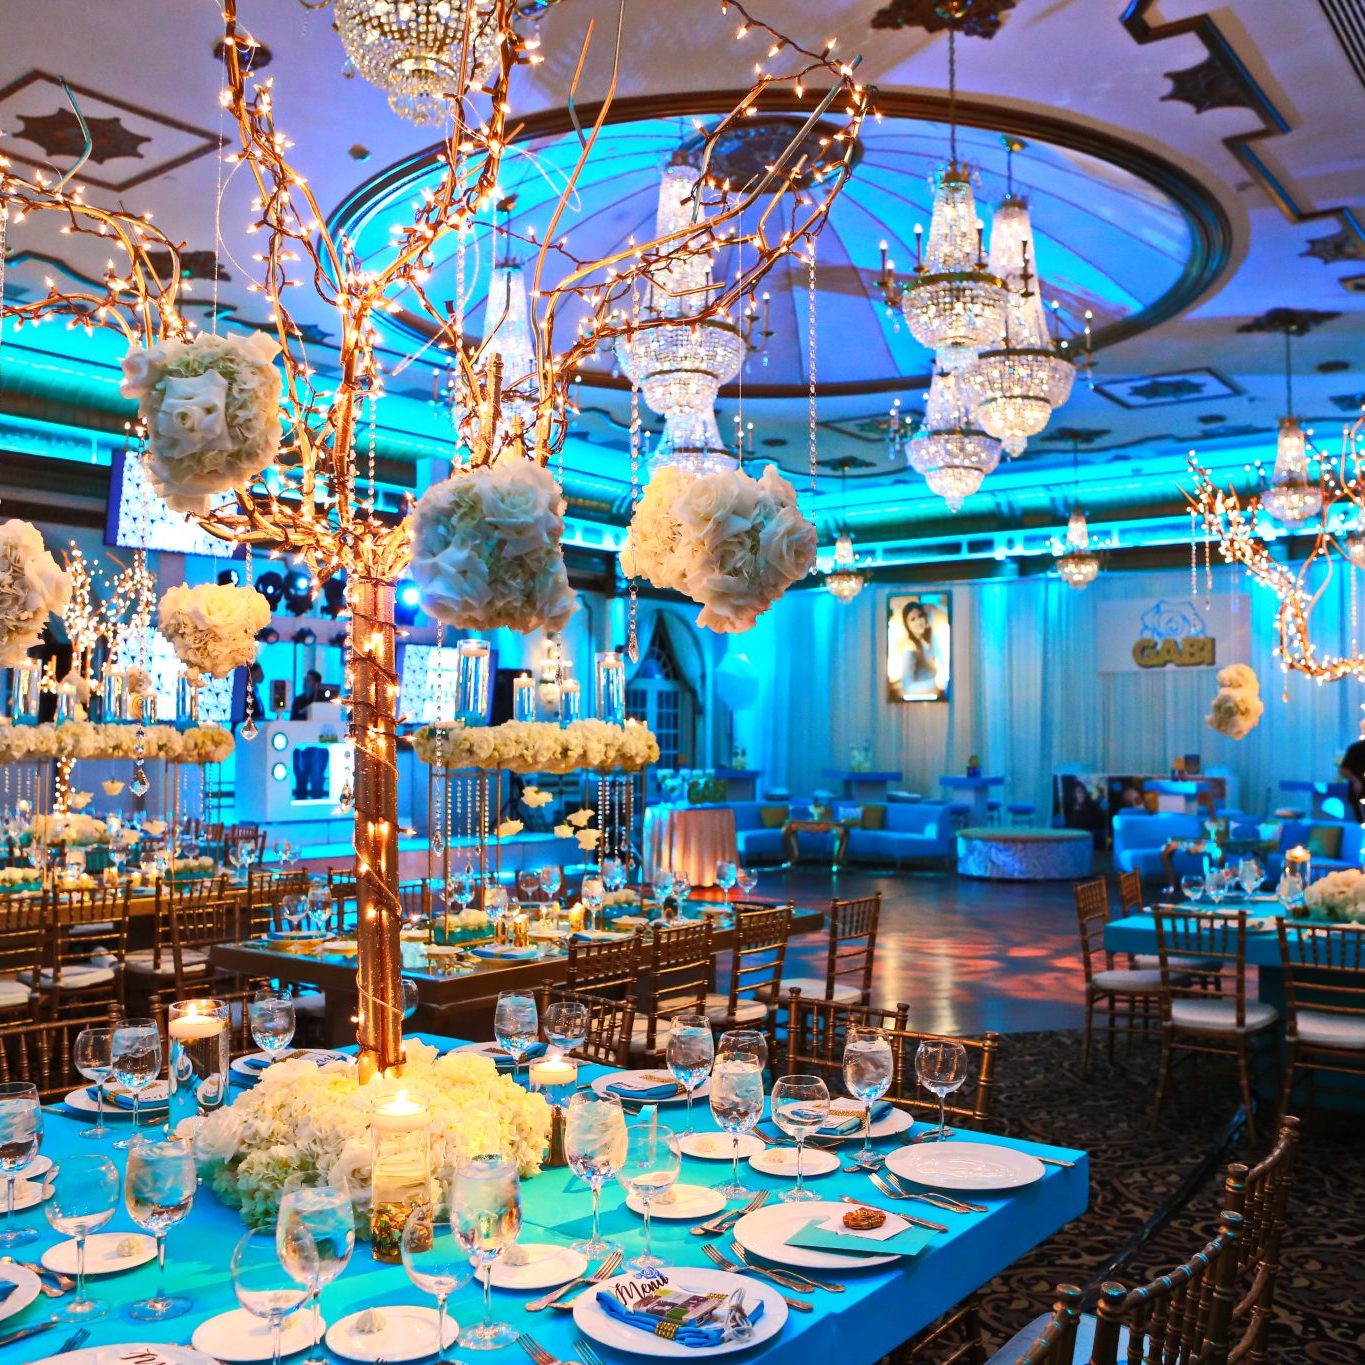 Elegant wedding reception hall decorated with blue lighting, crystal chandeliers, and floral centerpieces on dining tables.